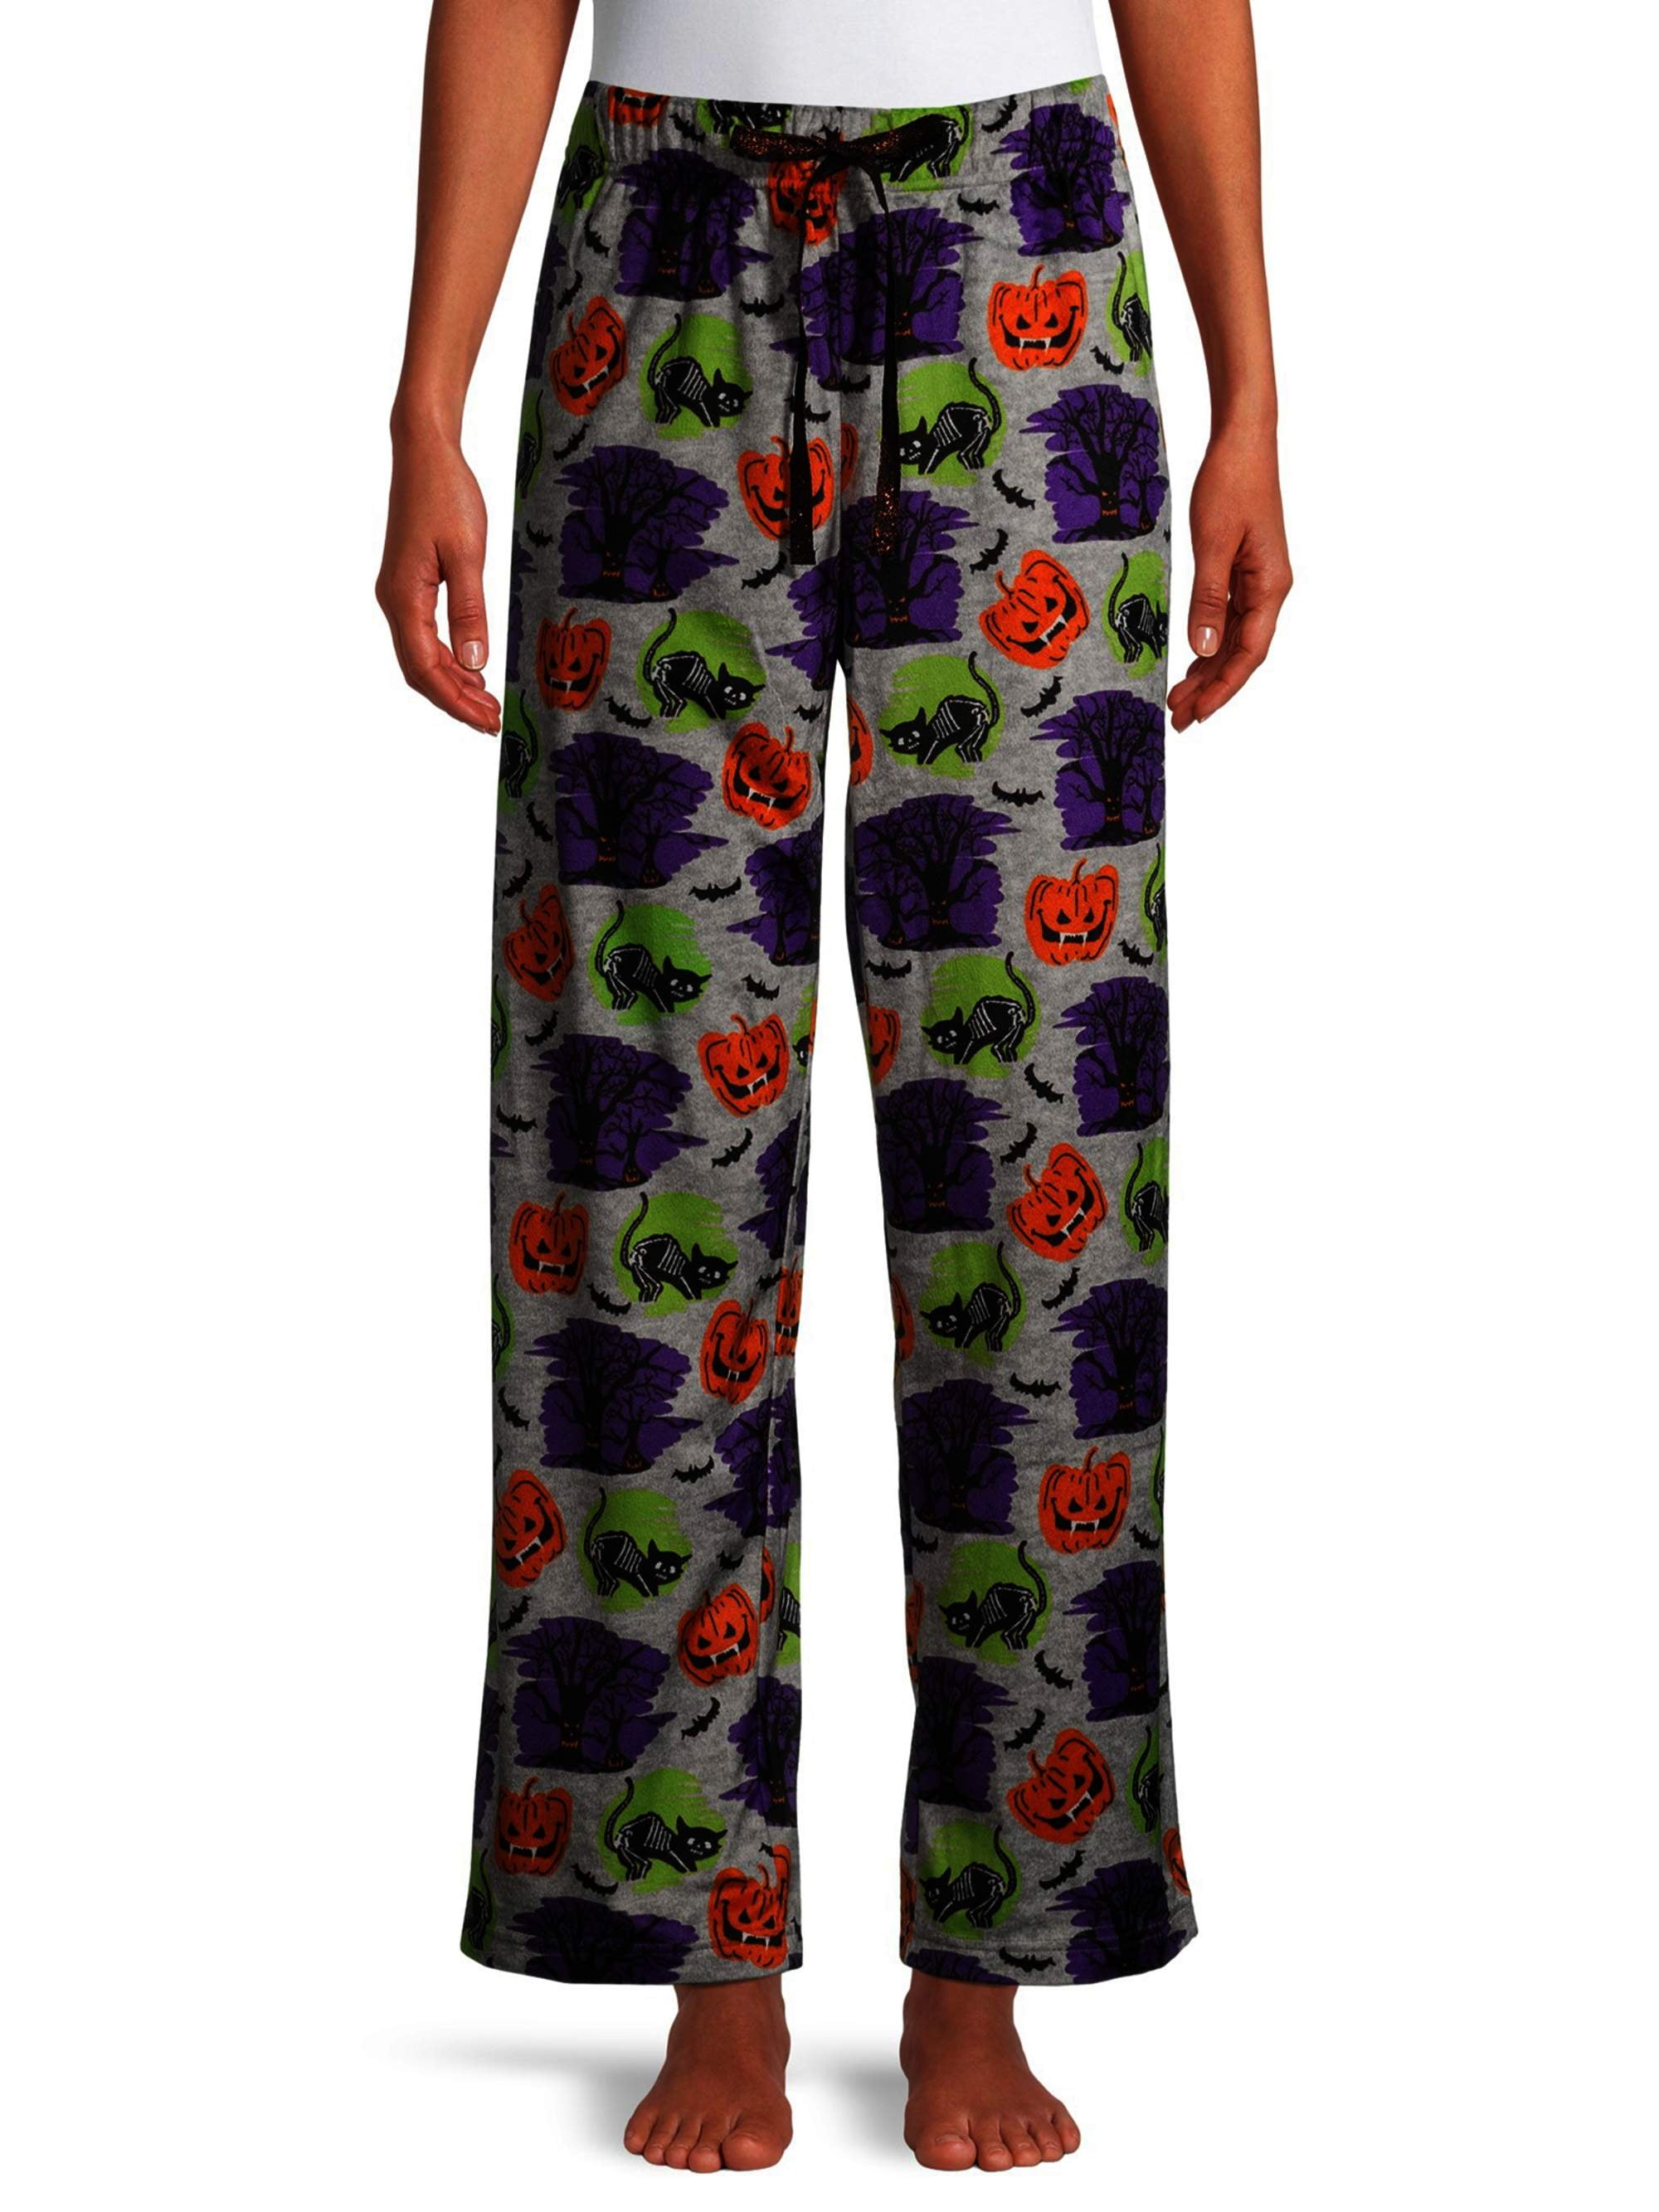 Briefly Stated Women's and Women's Plus Halloween Pajama Pants ...